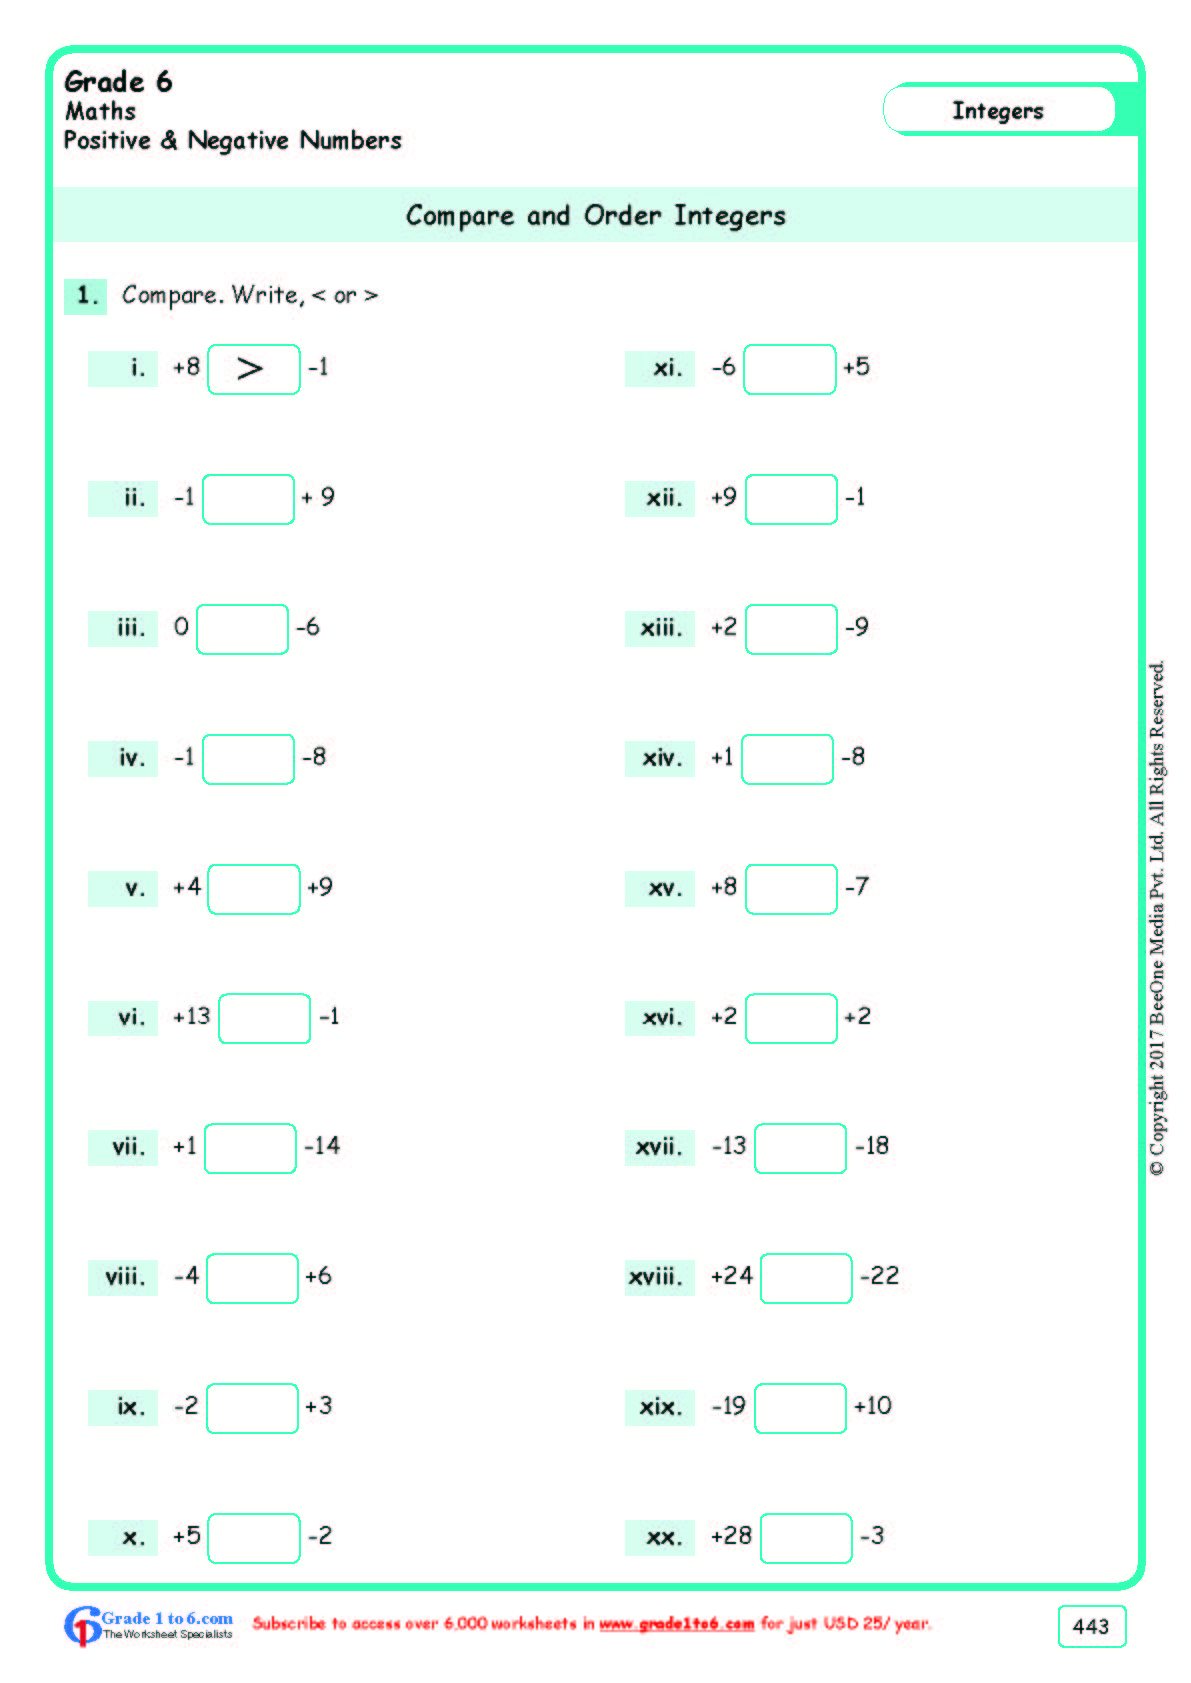 Comparing & Ordering Integers Worksheets|www.grade1to6.com